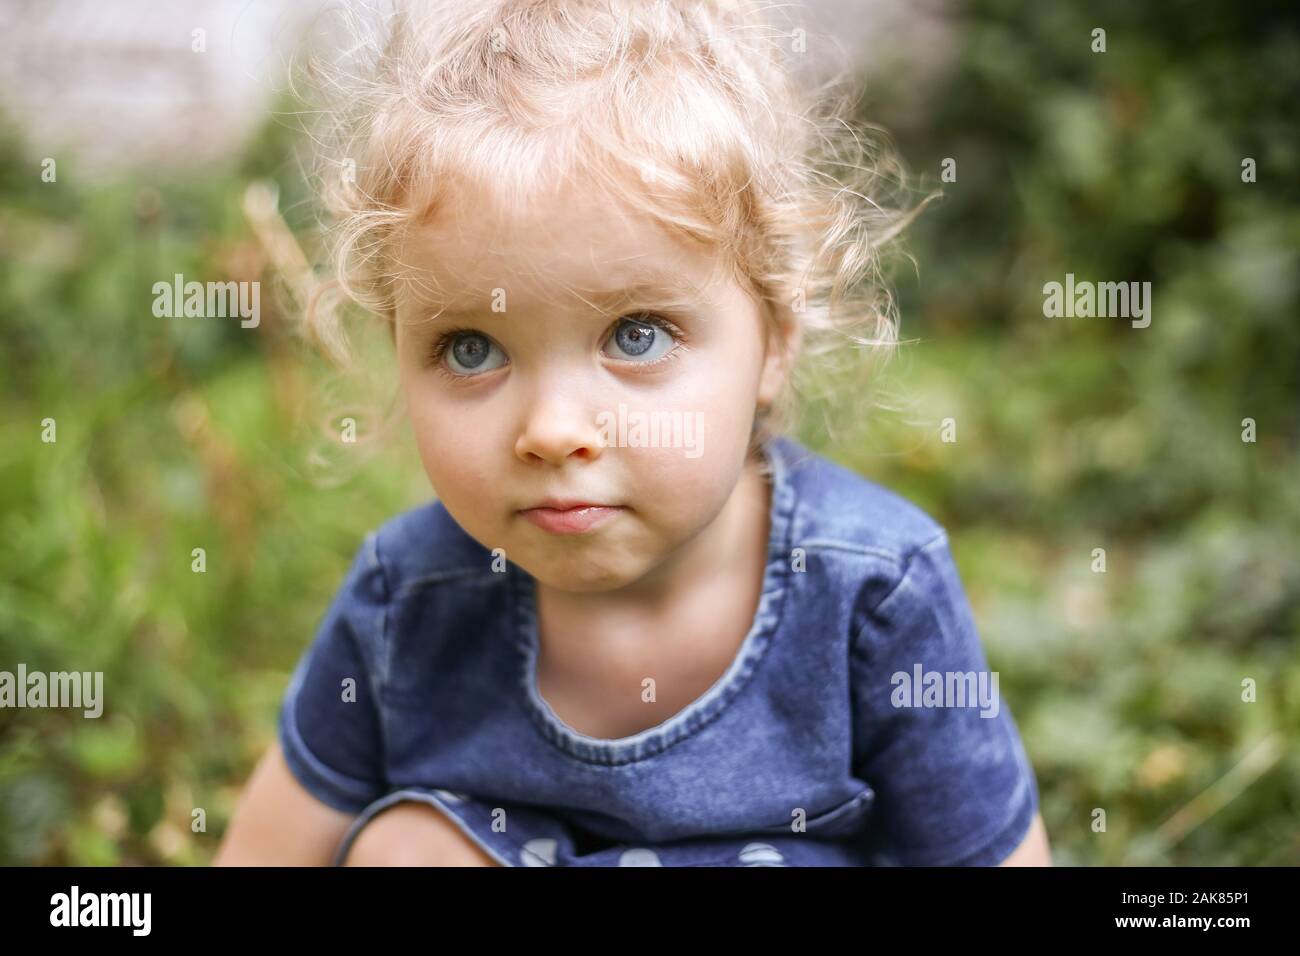 Portrait Of A Little Beautiful European Girl With Curly Blonde